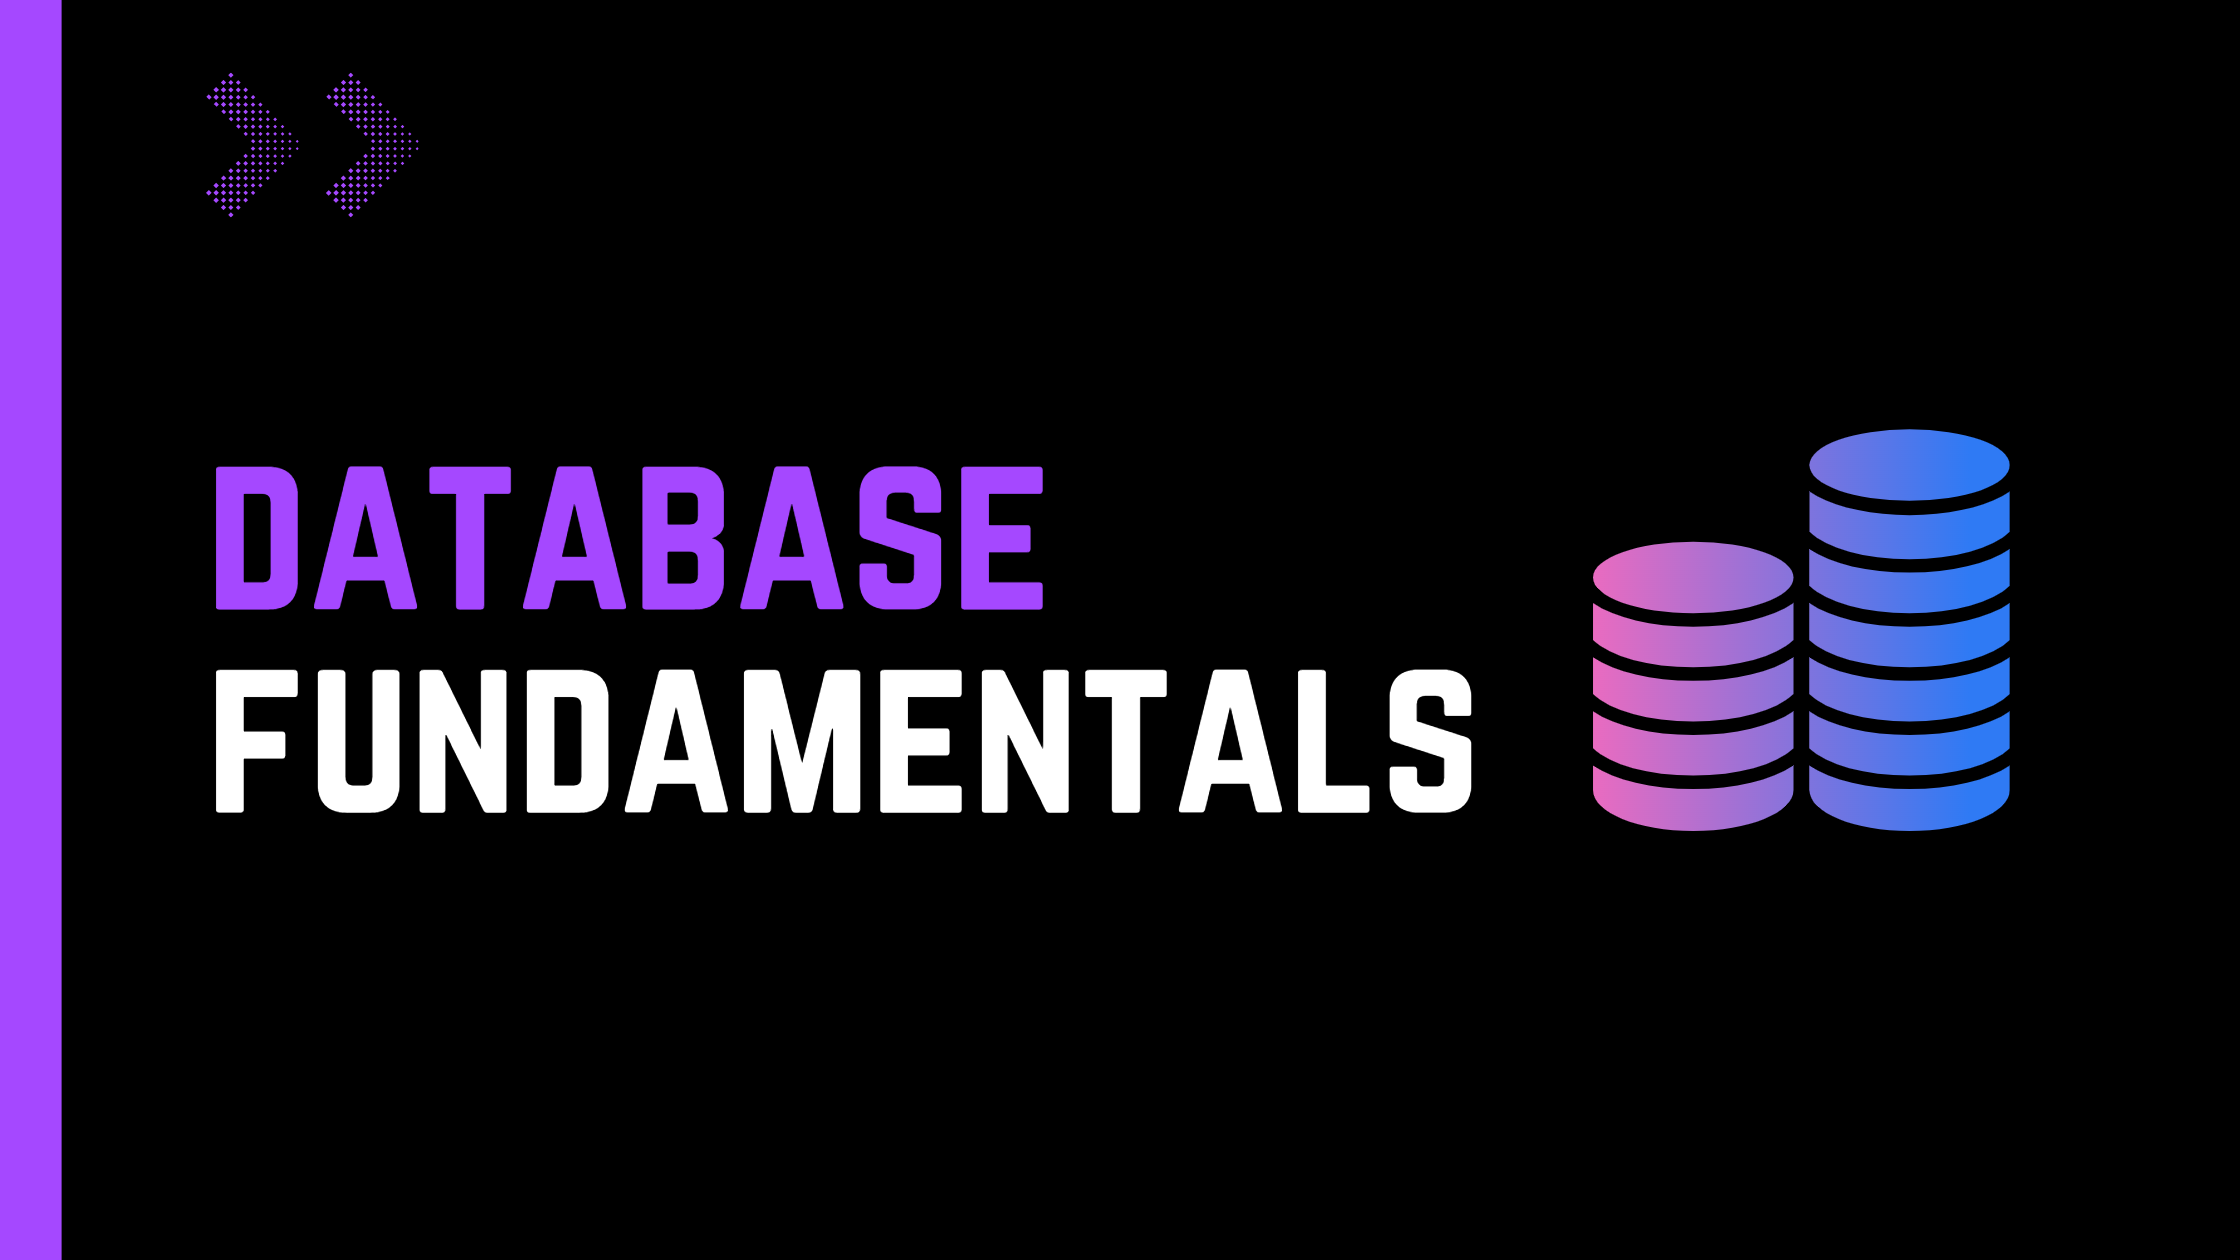 Database fundamentals every programmer should know
